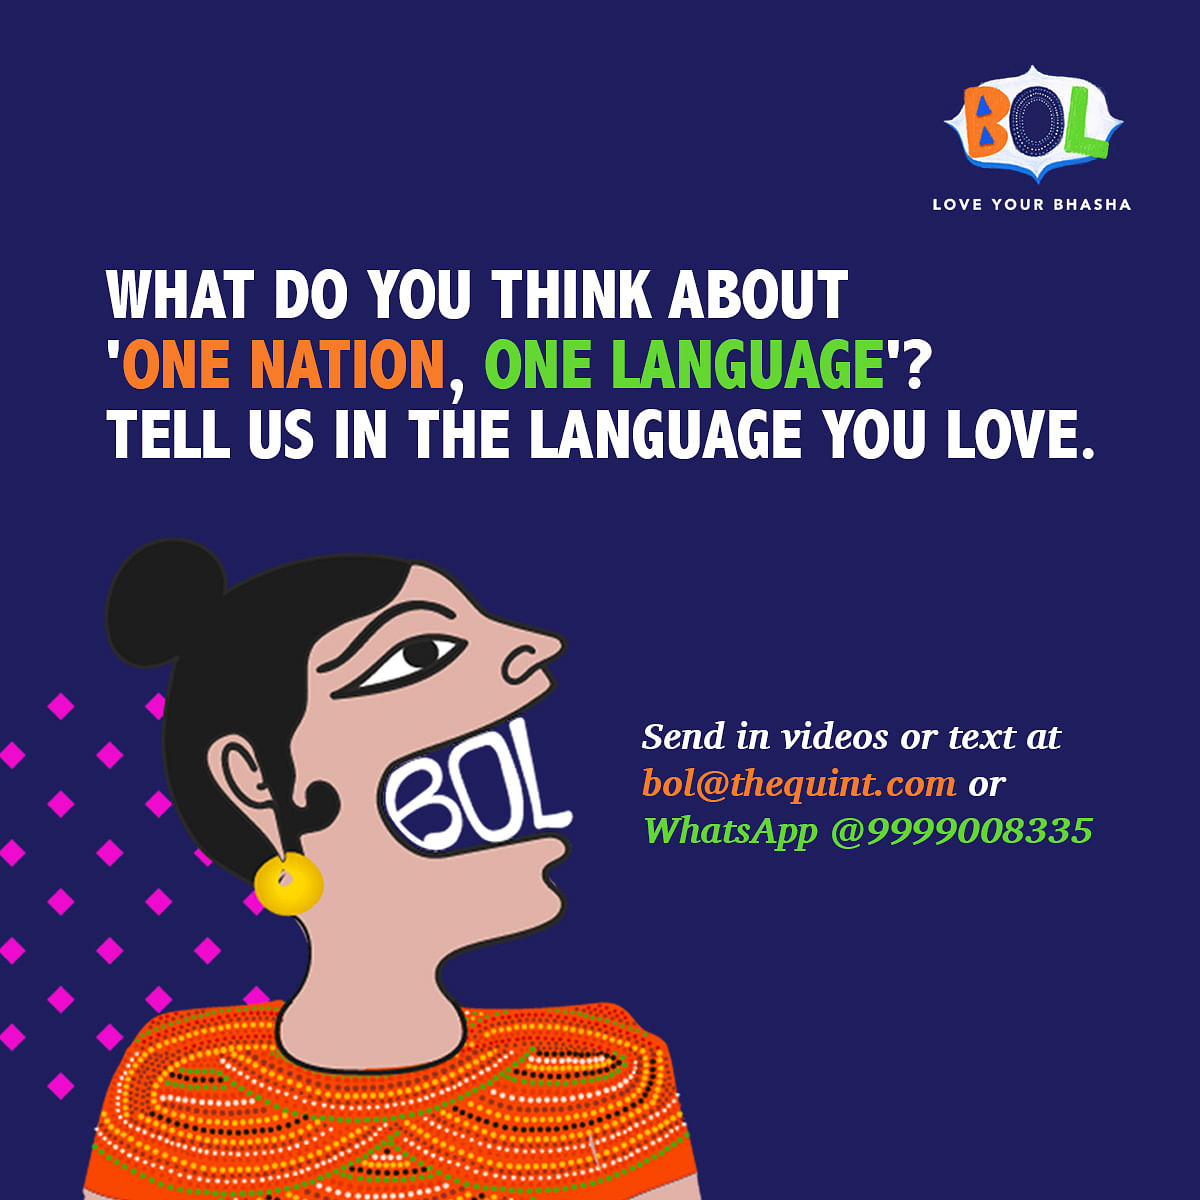 Here’s to celebrating the multiplicity of India’s languages!  